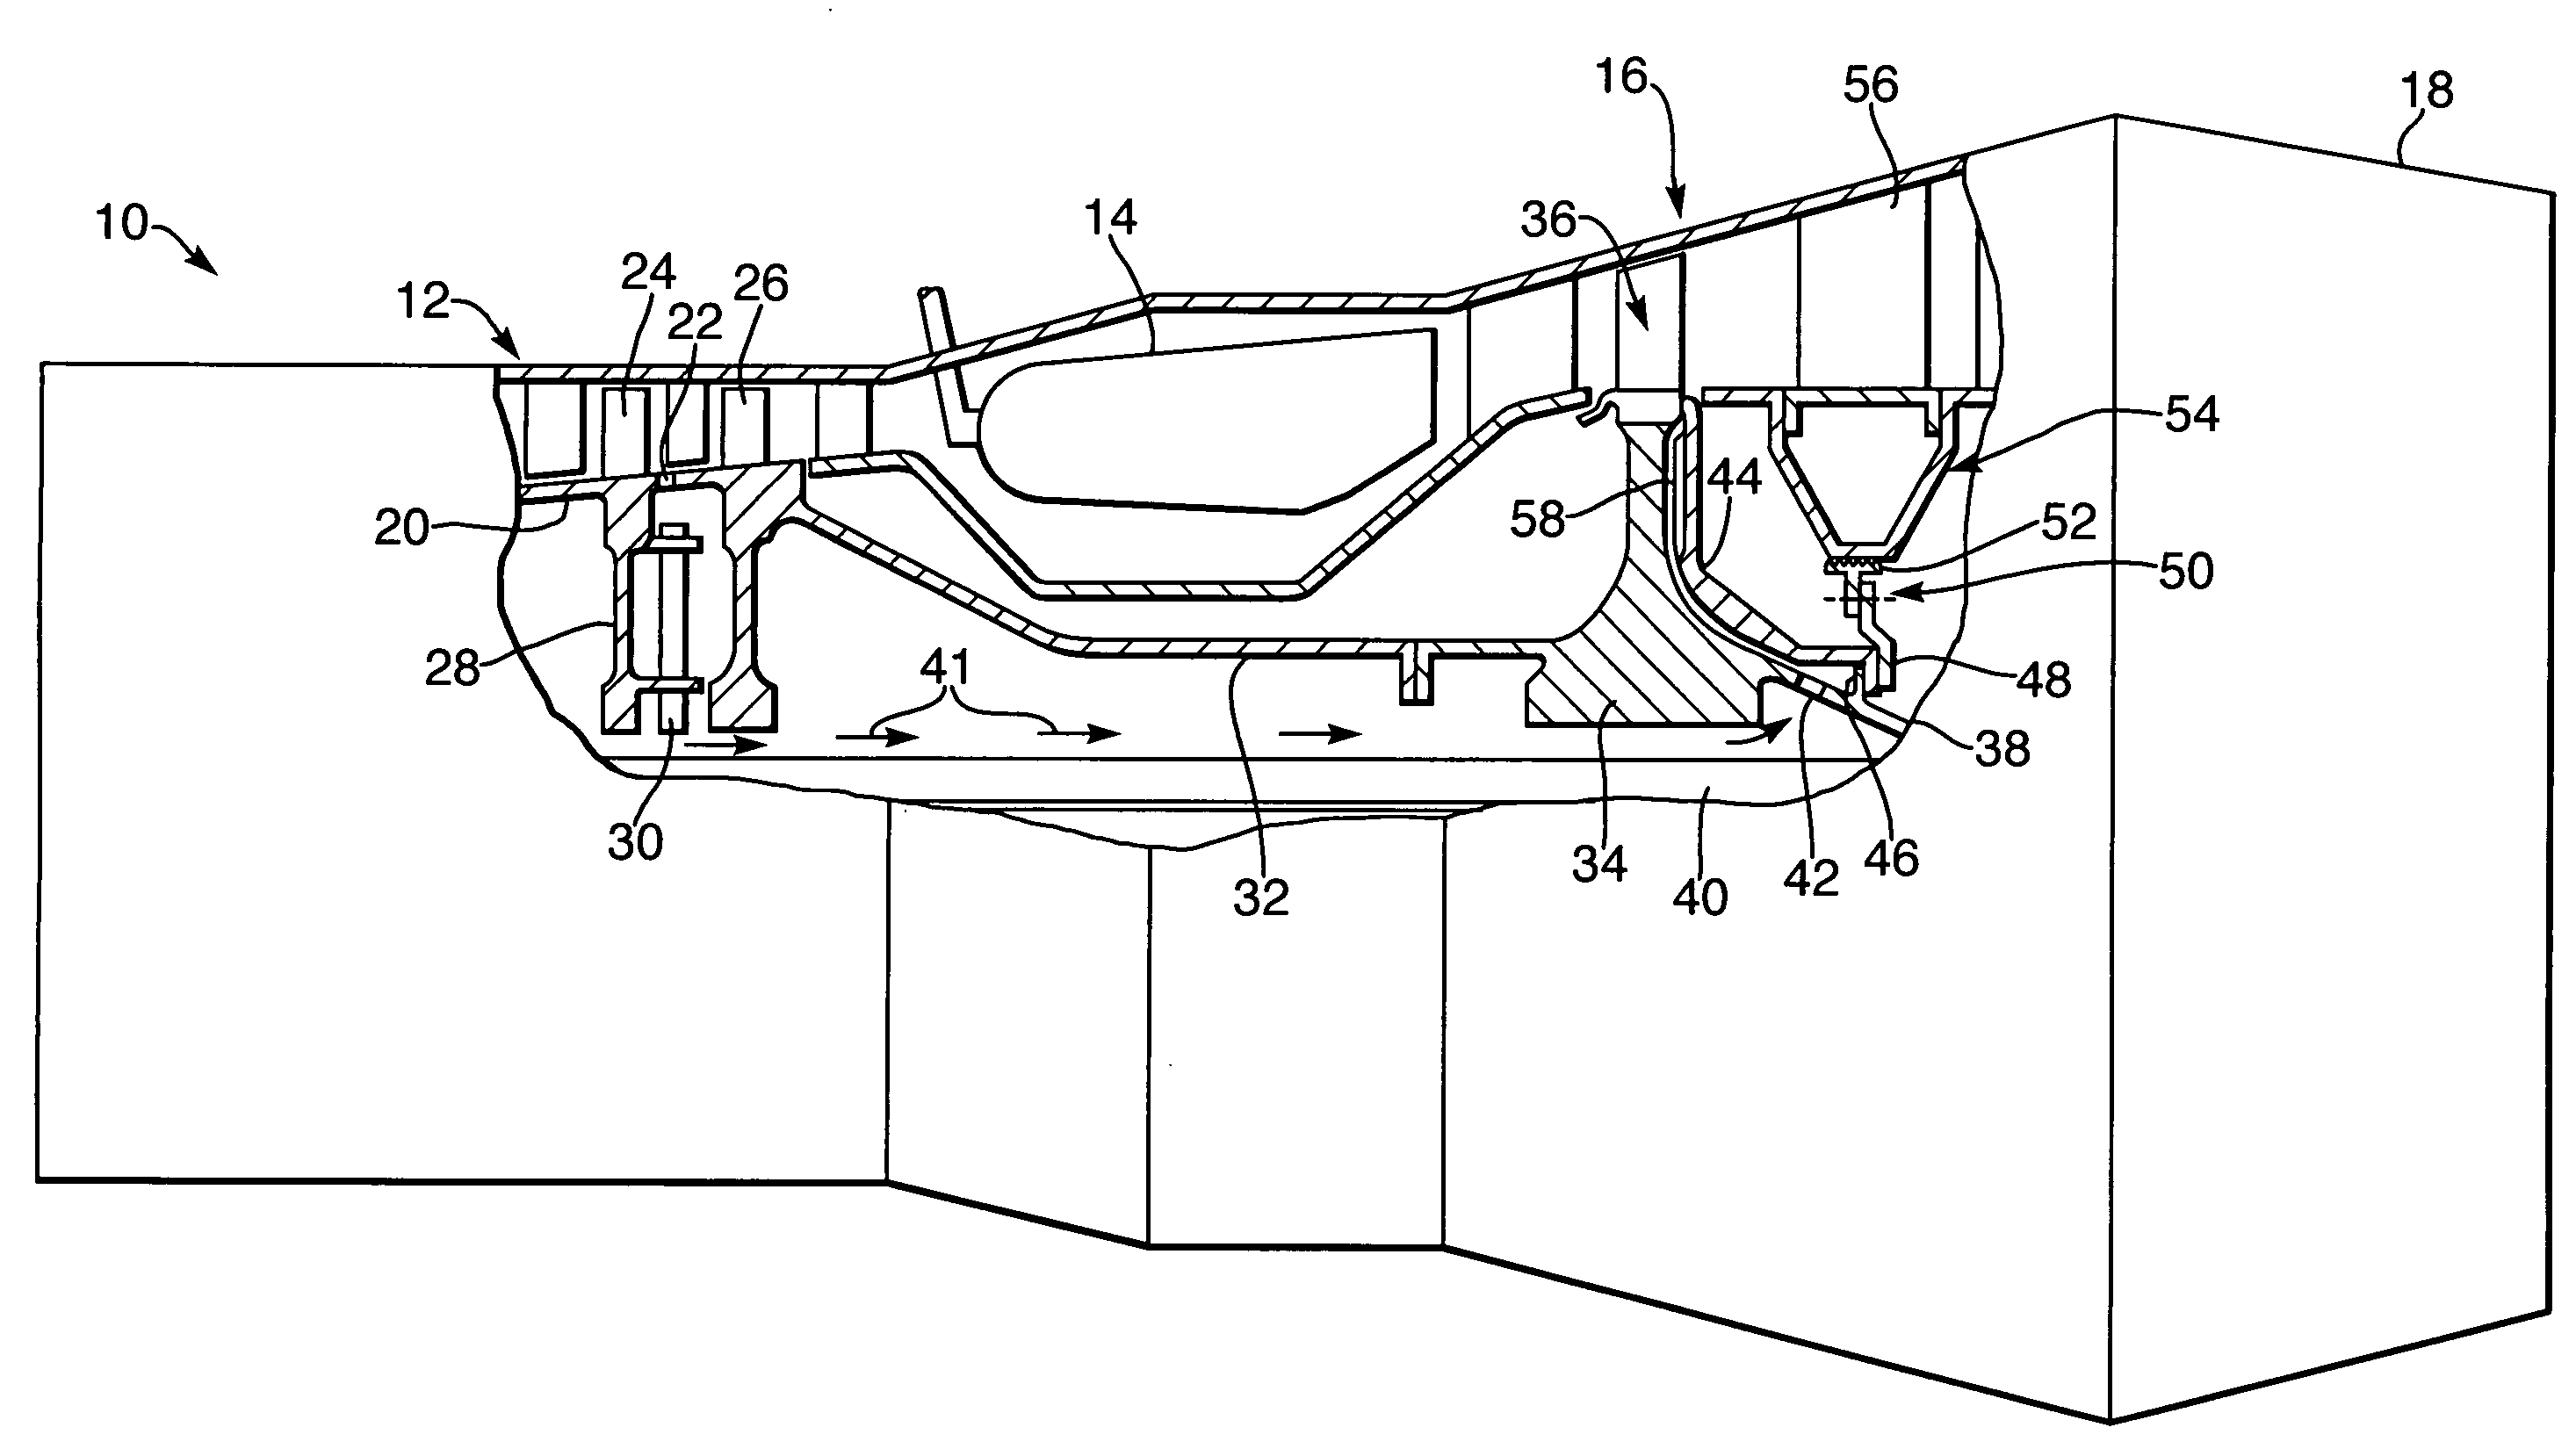 Turbine blade cooling system